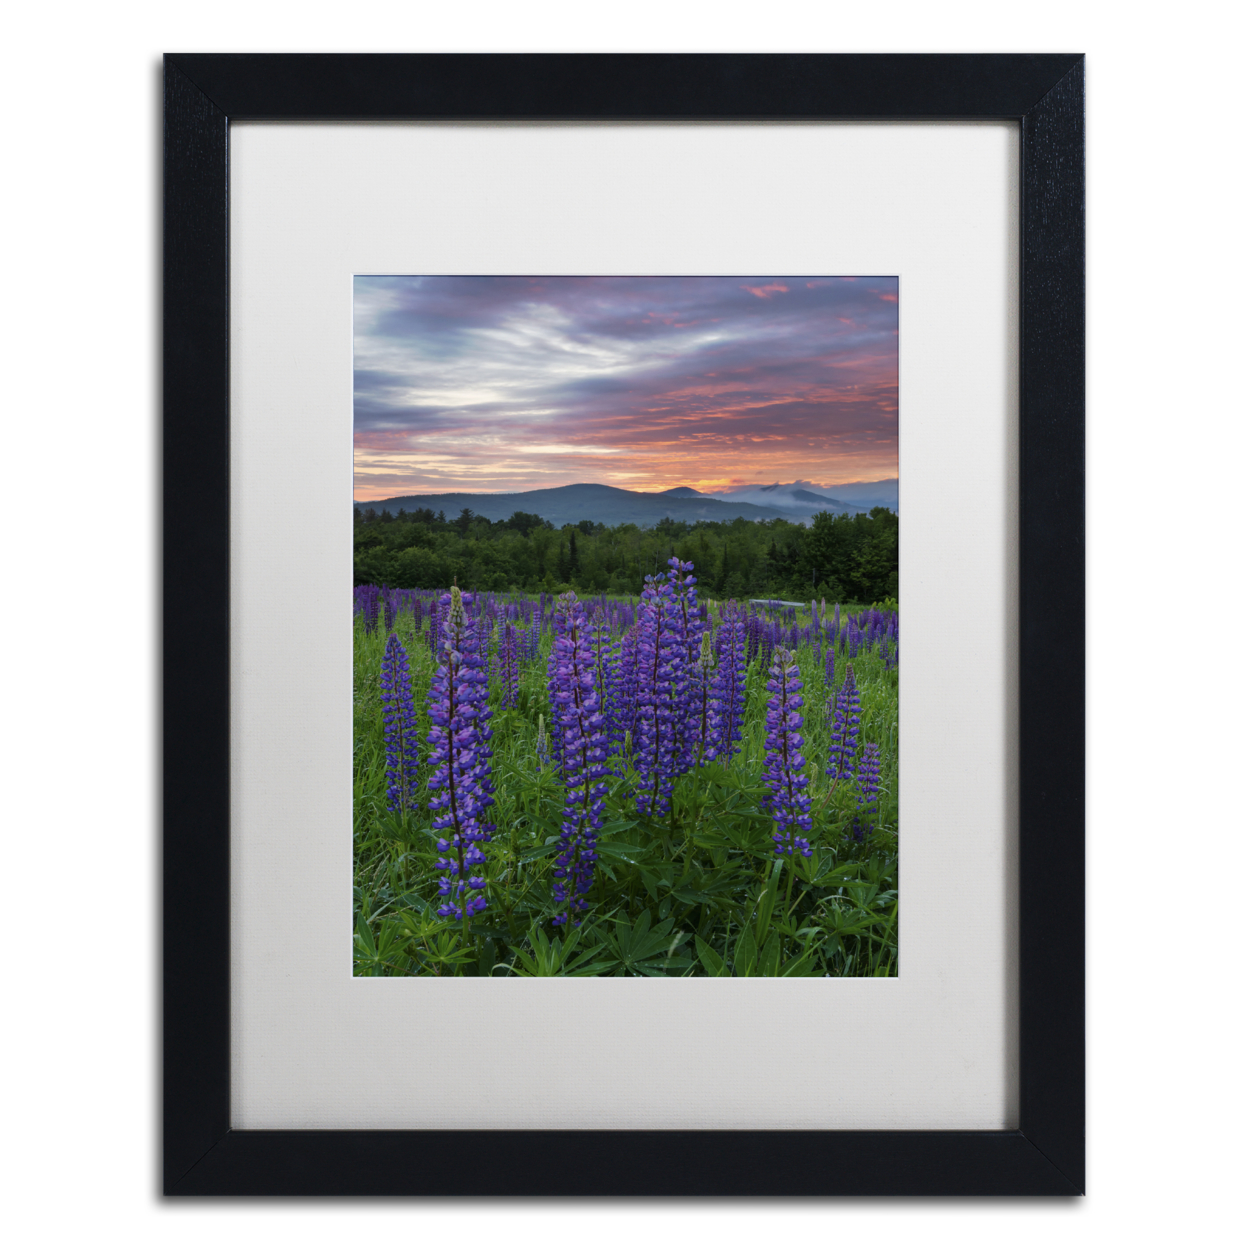 Michael Blanchette Photography 'Fire In The Sky' Black Wooden Framed Art 18 X 22 Inches